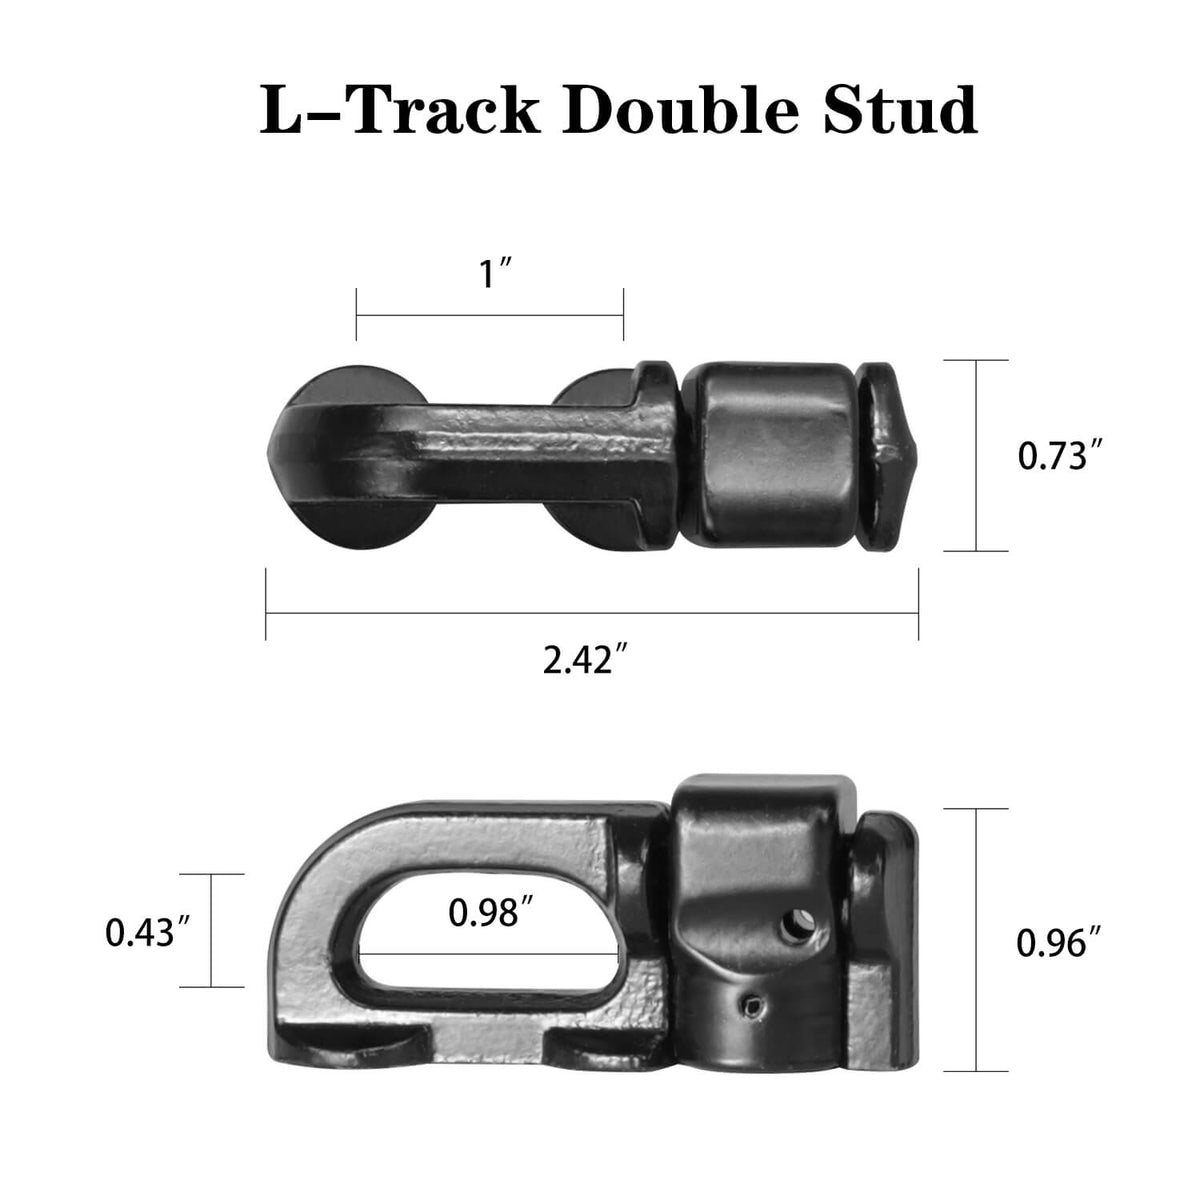 L-Track Double Stud Tie Down Fitting